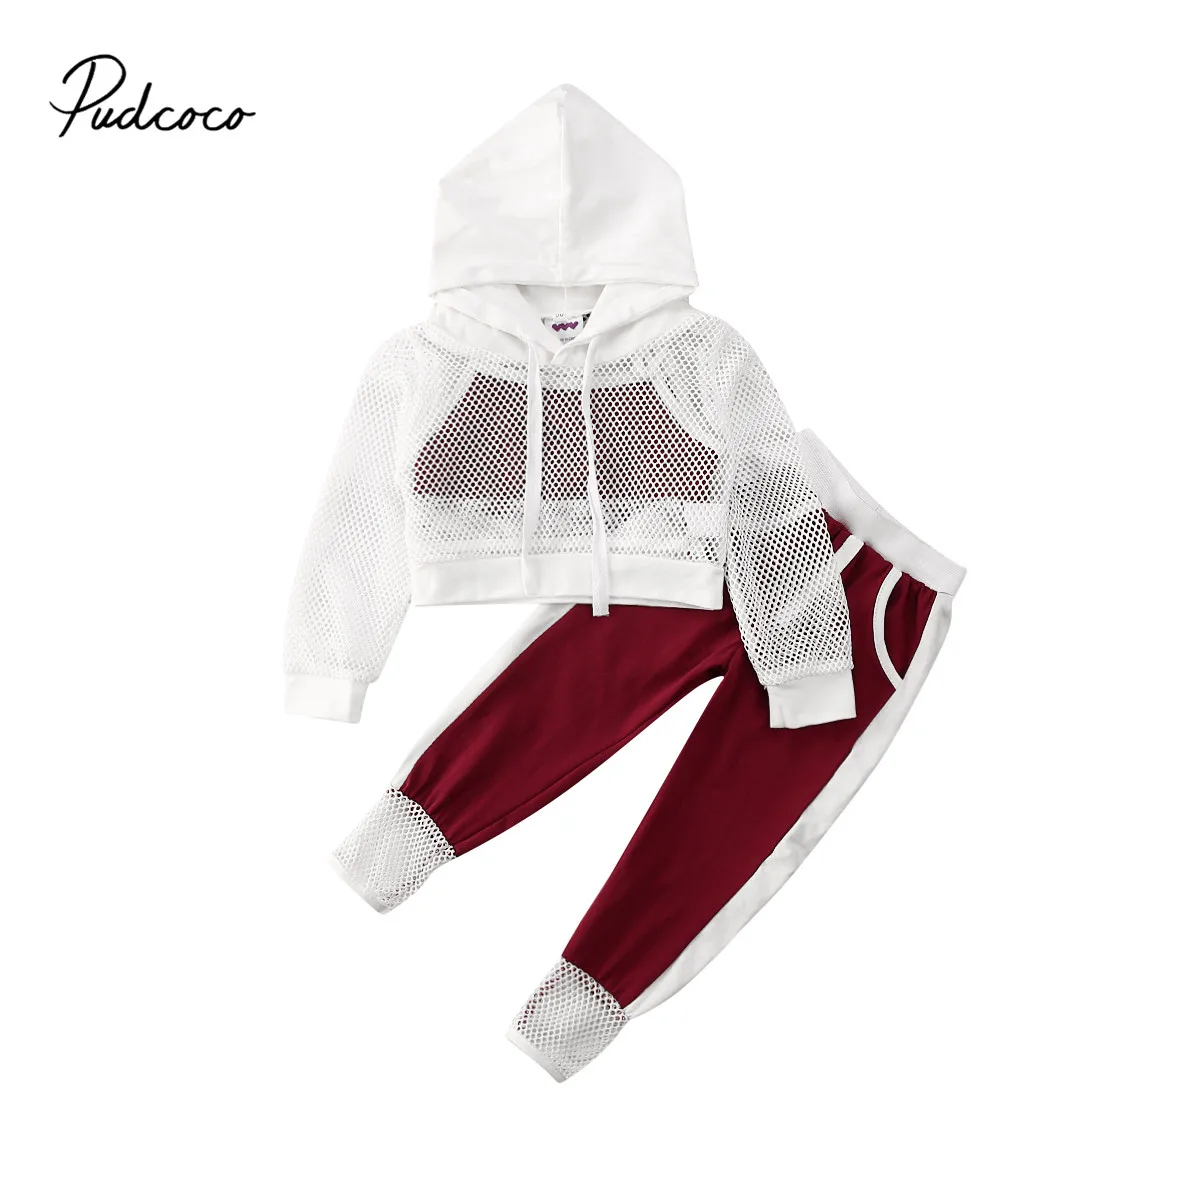 

Pudcoco Toddler Baby Girls Clothes Set Mesh Pullover Hooded Top + Camis Crop Top + Wine Red Pants 3Pcs Sports Tracksuit Outfits